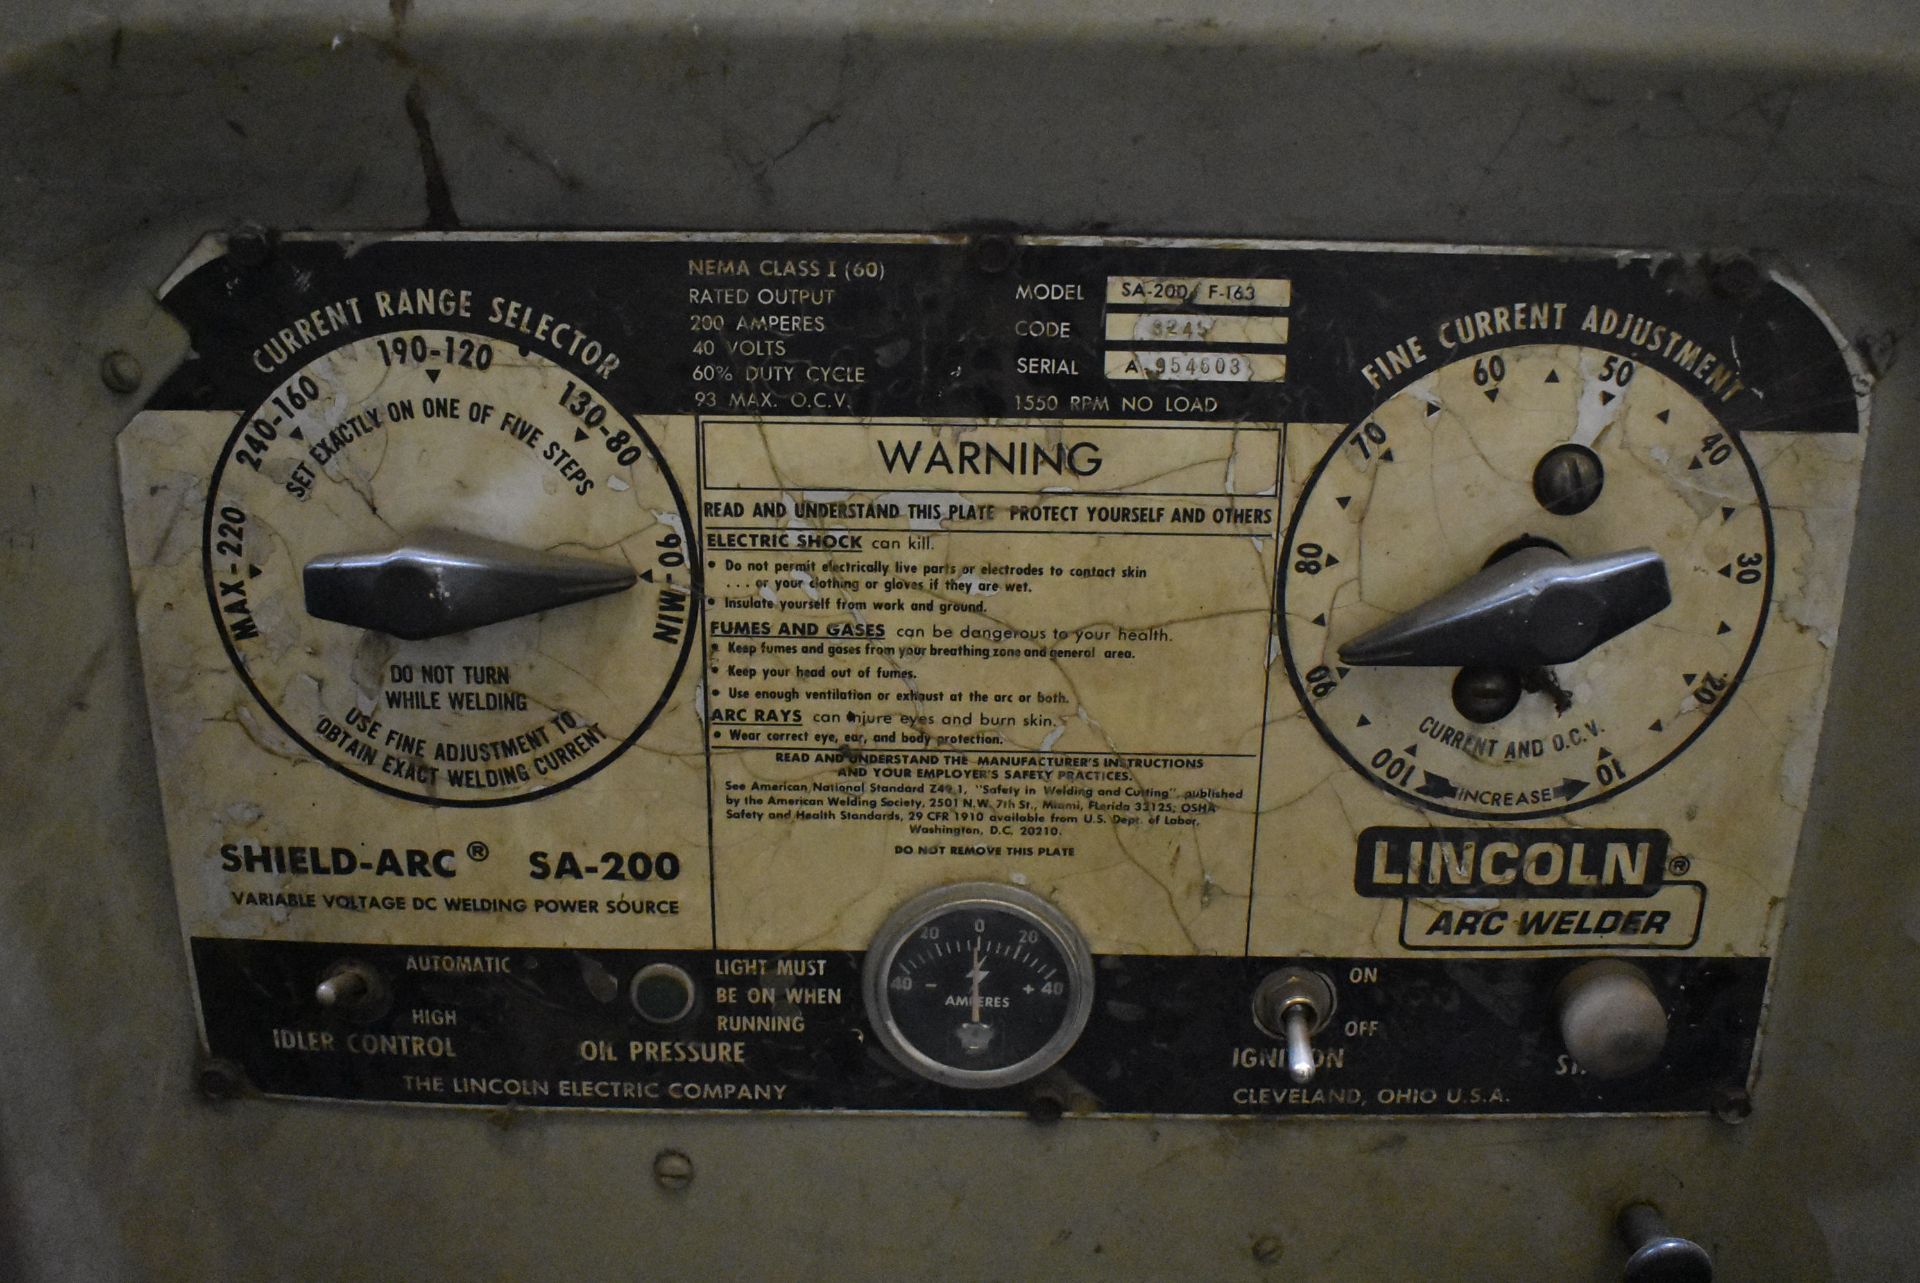 LINCOLN MODEL SA-200 F163 GAS POWERED ARC WELDER S/N A954603 WITH ELECTRIC START, FINE CURRENT - Image 3 of 15